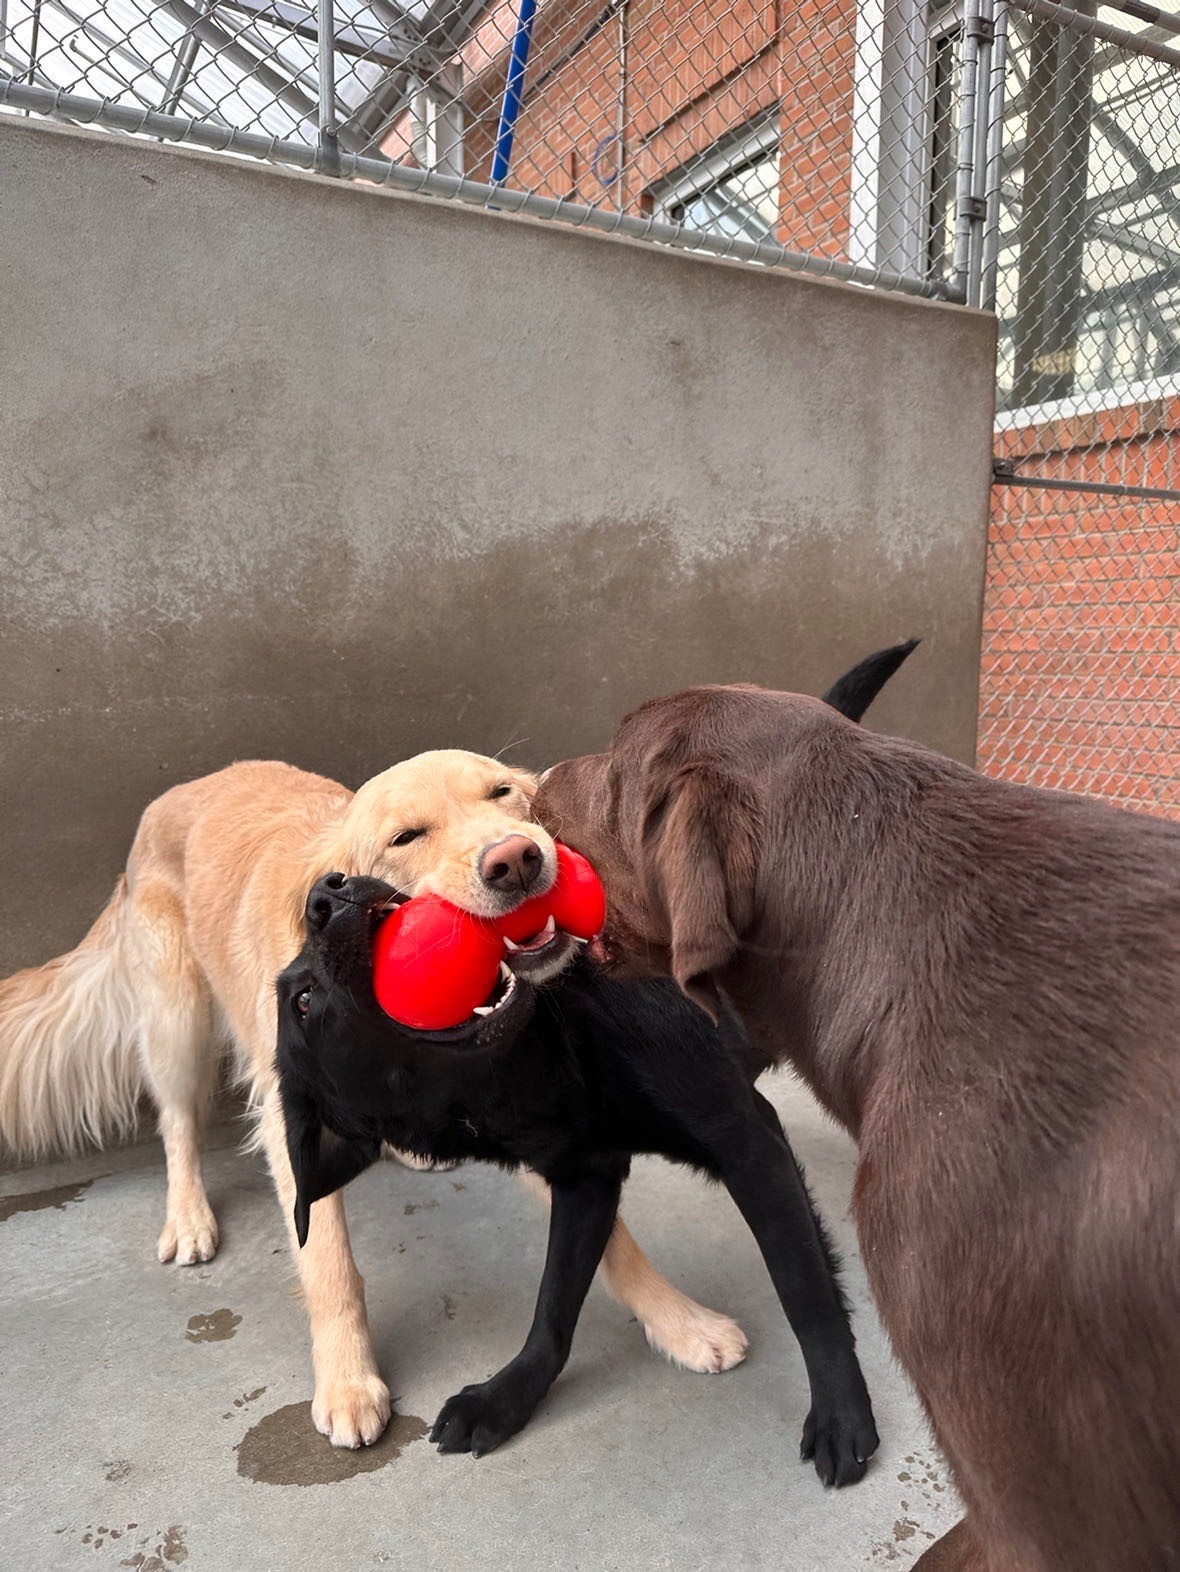 A black Lab, a golden retriever, and a chocolate Lab all hold different parts of the same red rubbery toy. The black Lab grabs the left side of the toy from under the golden retriever holding the center of the toy. The chocolate Lab holds the toy on the right side. The black Lab's angle makes for a not so picture perfect photo of dogs holding onto the same toy.